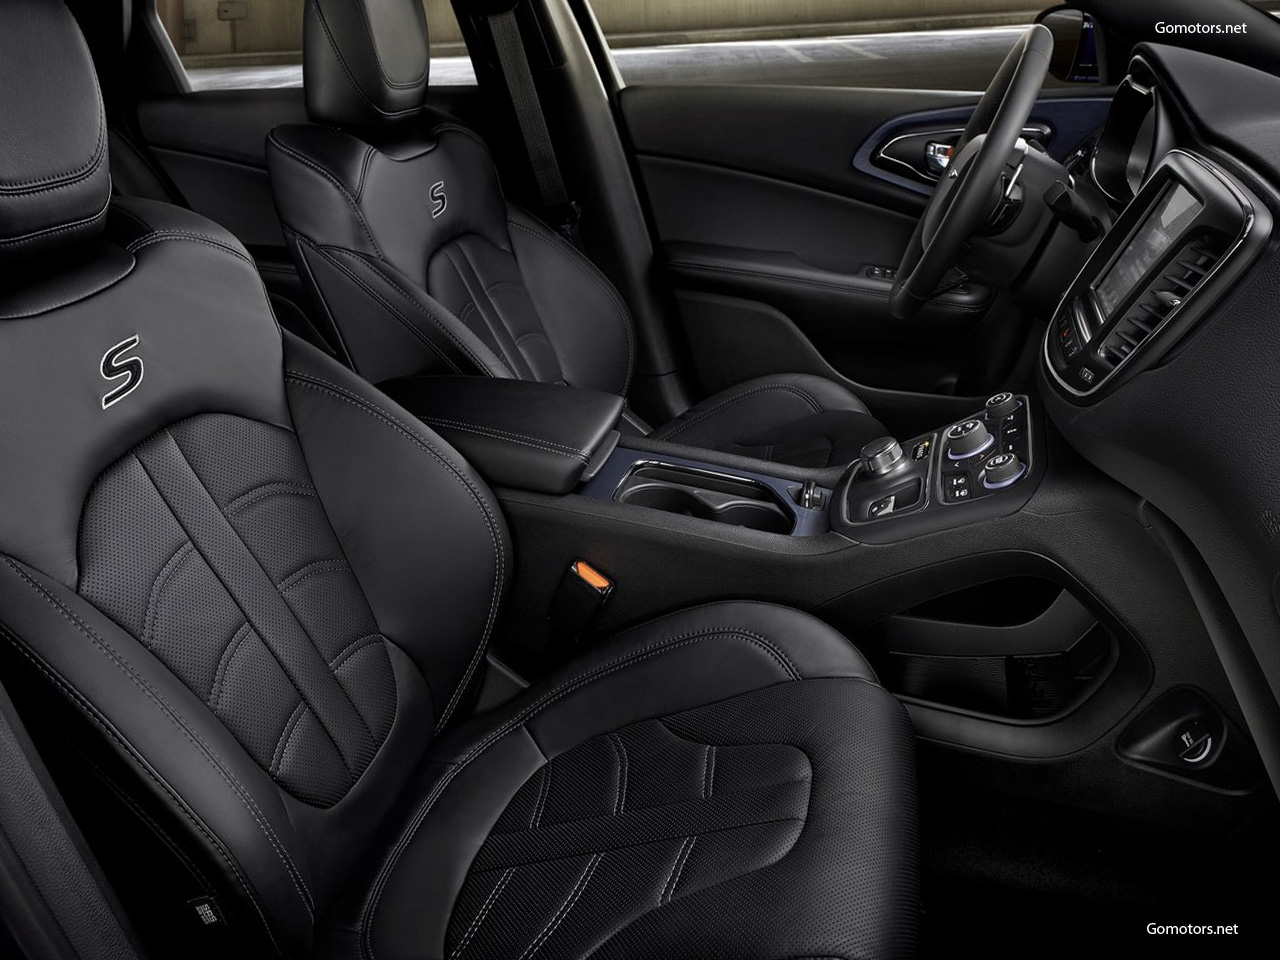 2015 Chrysler 200 Interior Picture 1 Reviews News